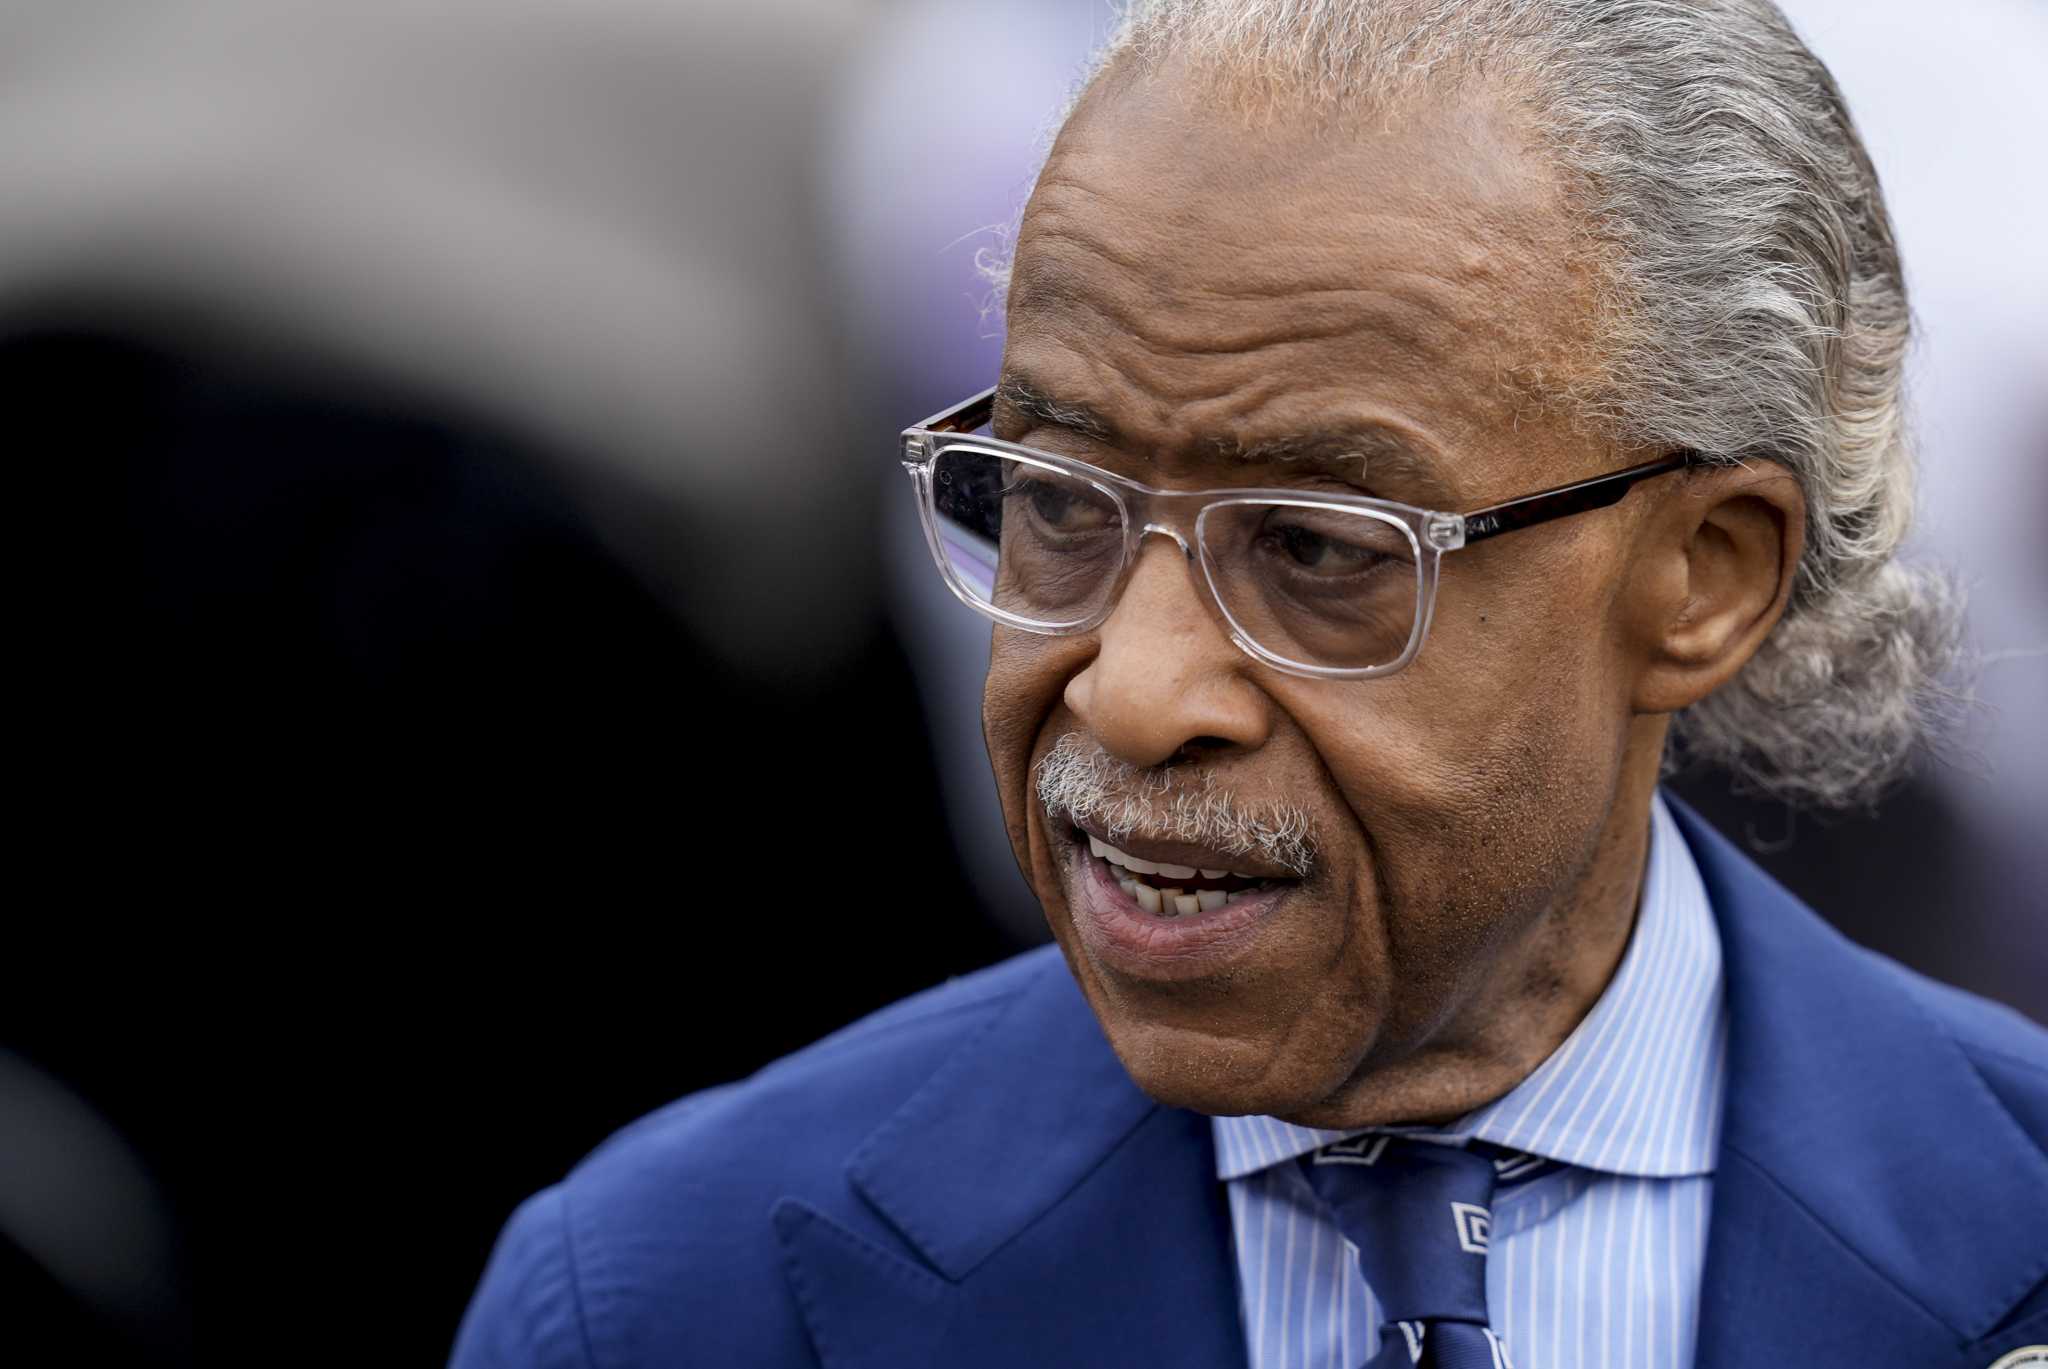 Al Sharpton to deliver eulogy for Black man who died after being held down by Milwaukee hotel guards